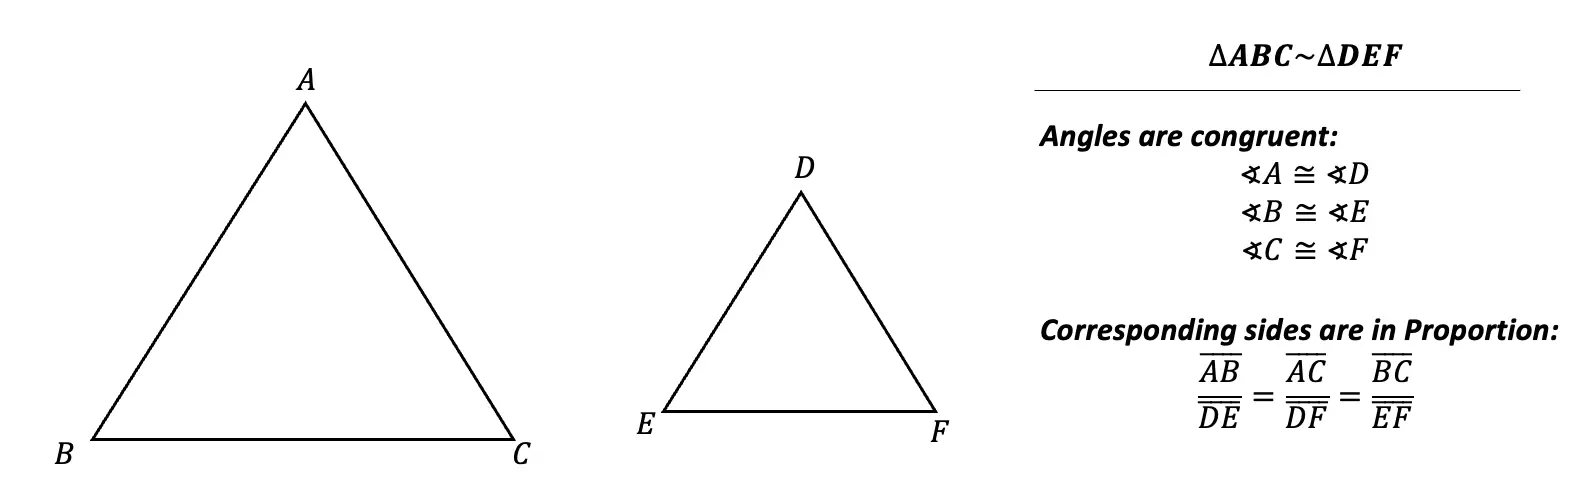 determine-whether-the-triangles-are-similar-by-aa-sss-sas-or-not